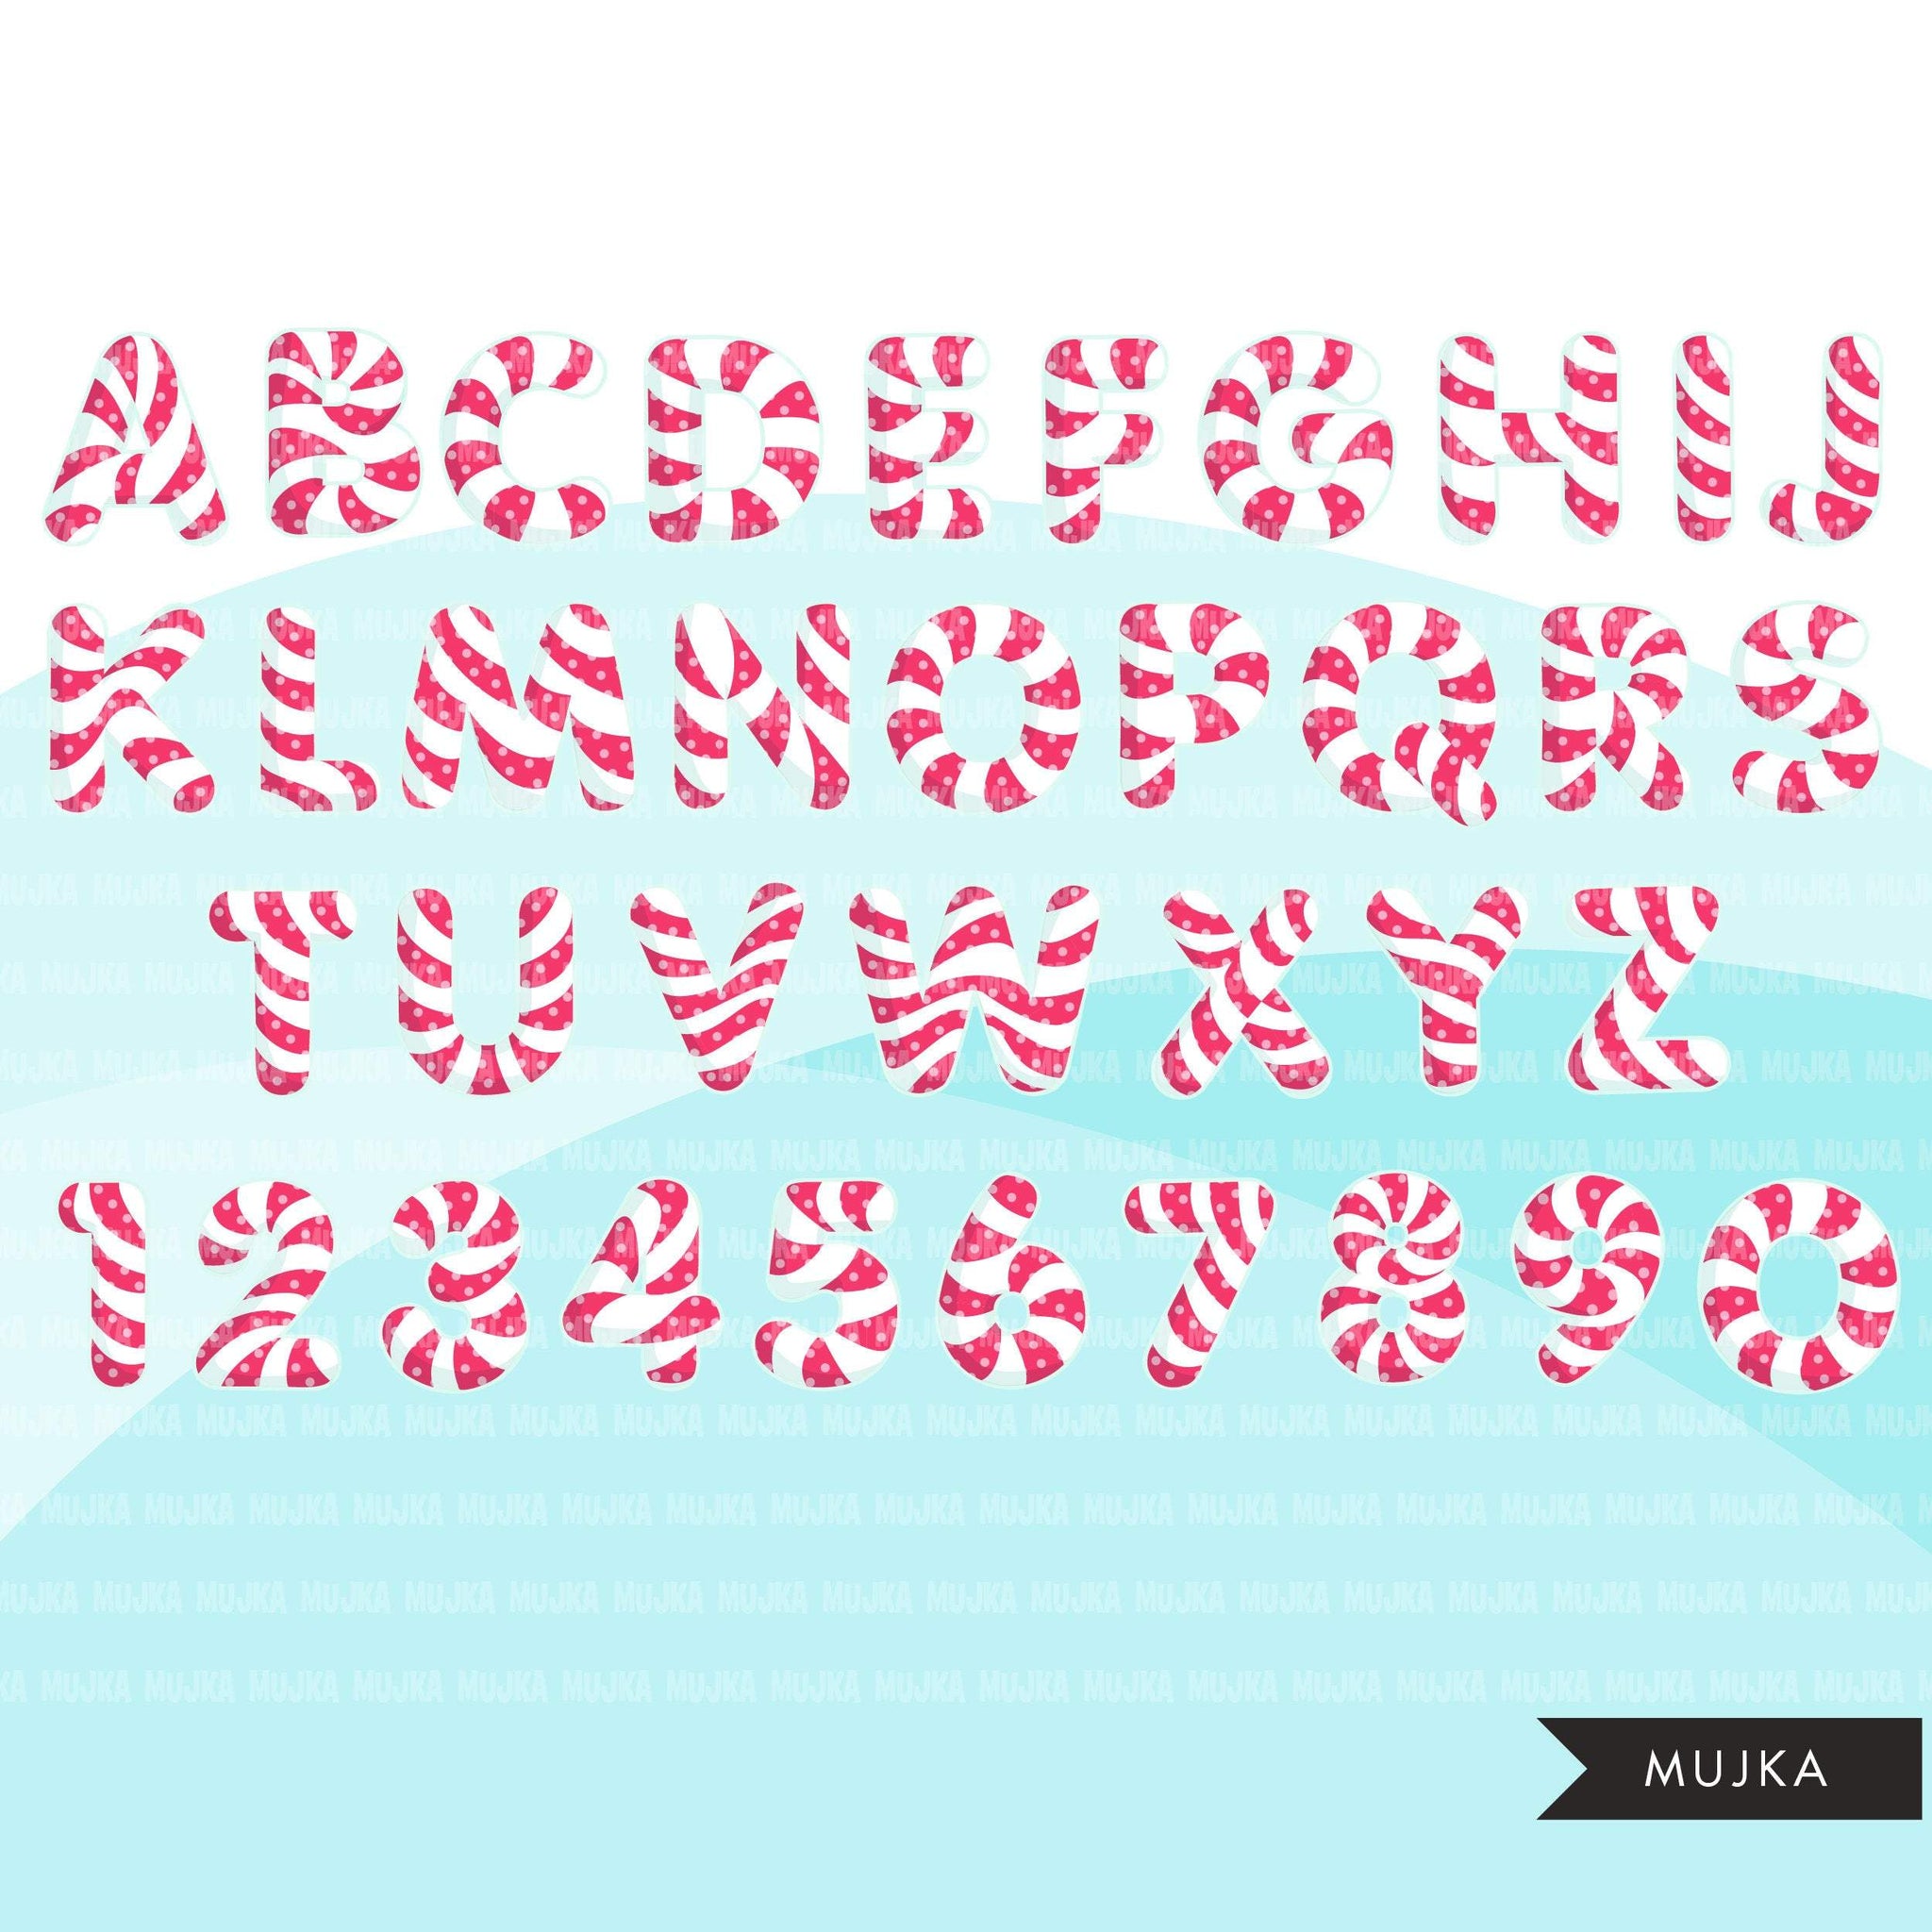 Polka dot Alphabet clipart, Lollipop shaped letters and numbers, birthday party clip art, cute letters Png graphics